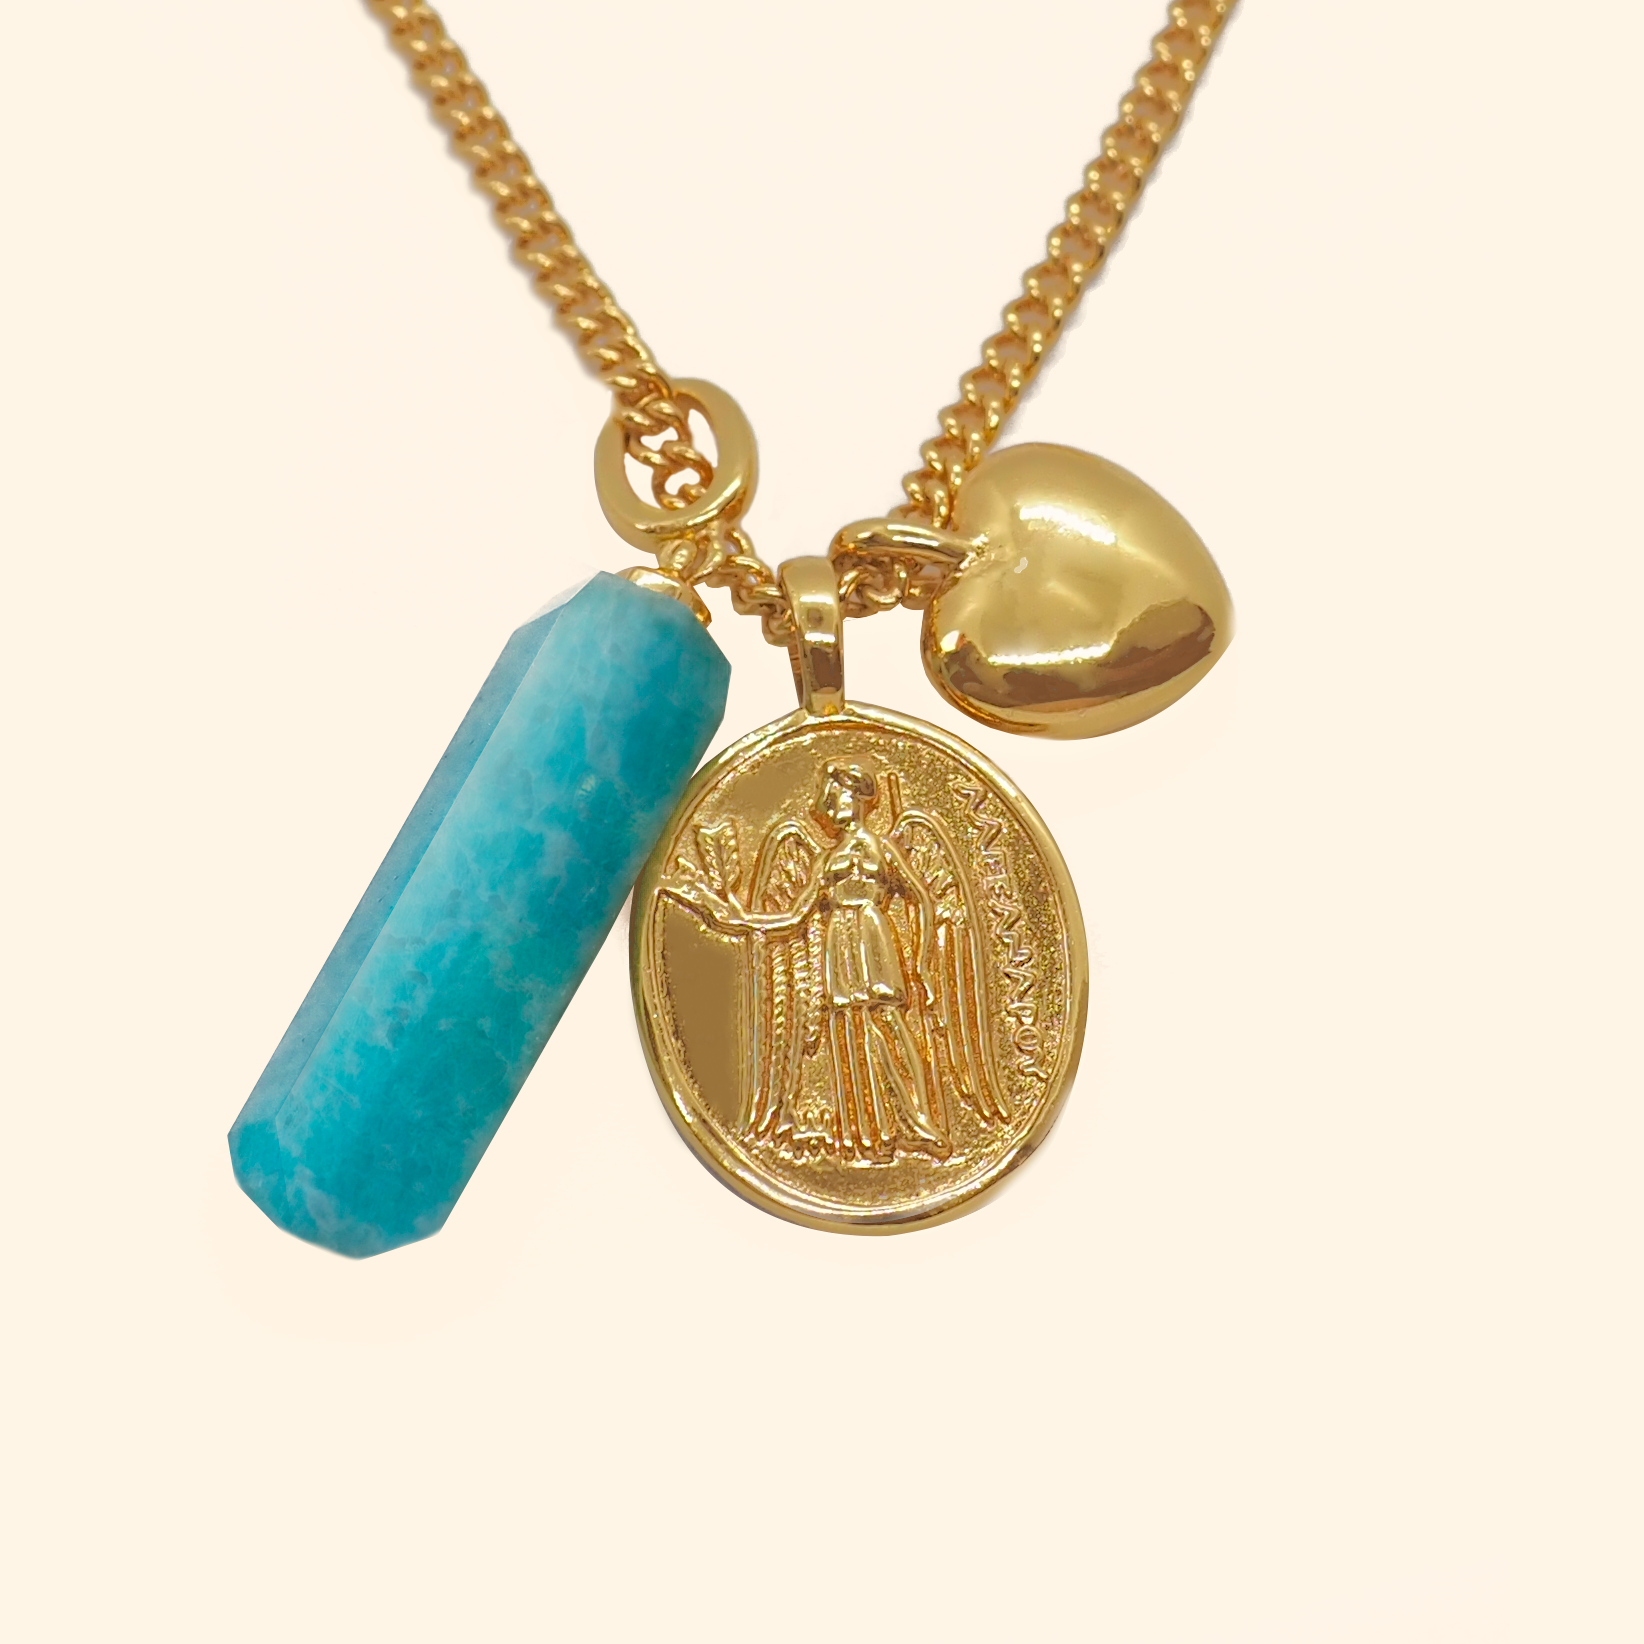 Angel heart with blue pendant necklace